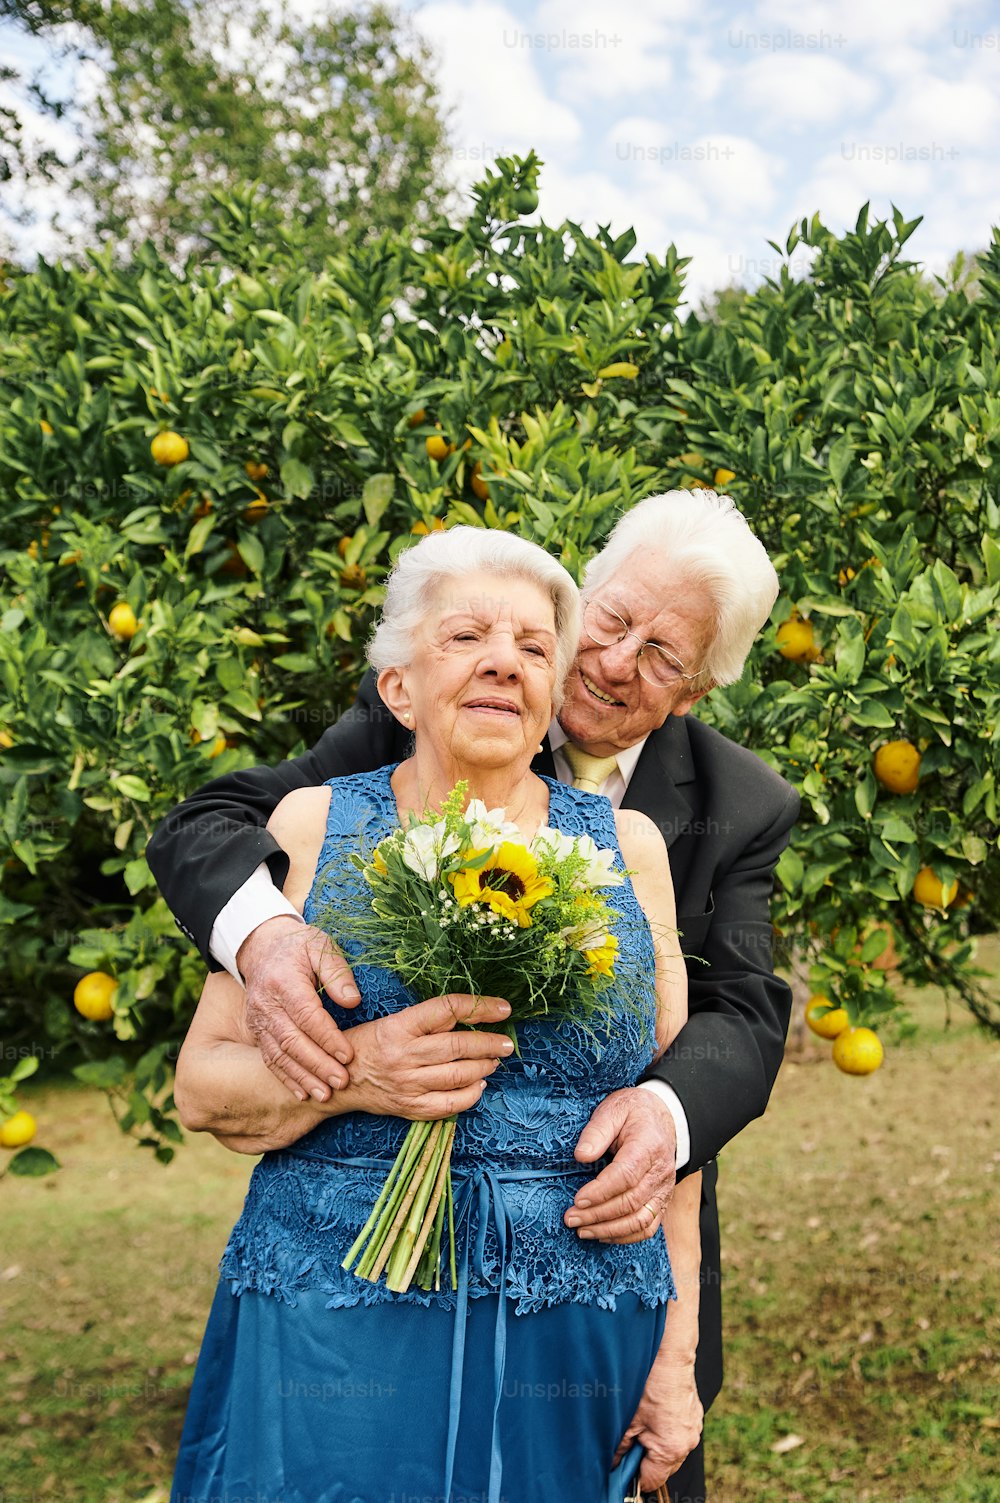 an older couple embracing each other in front of an orange tree